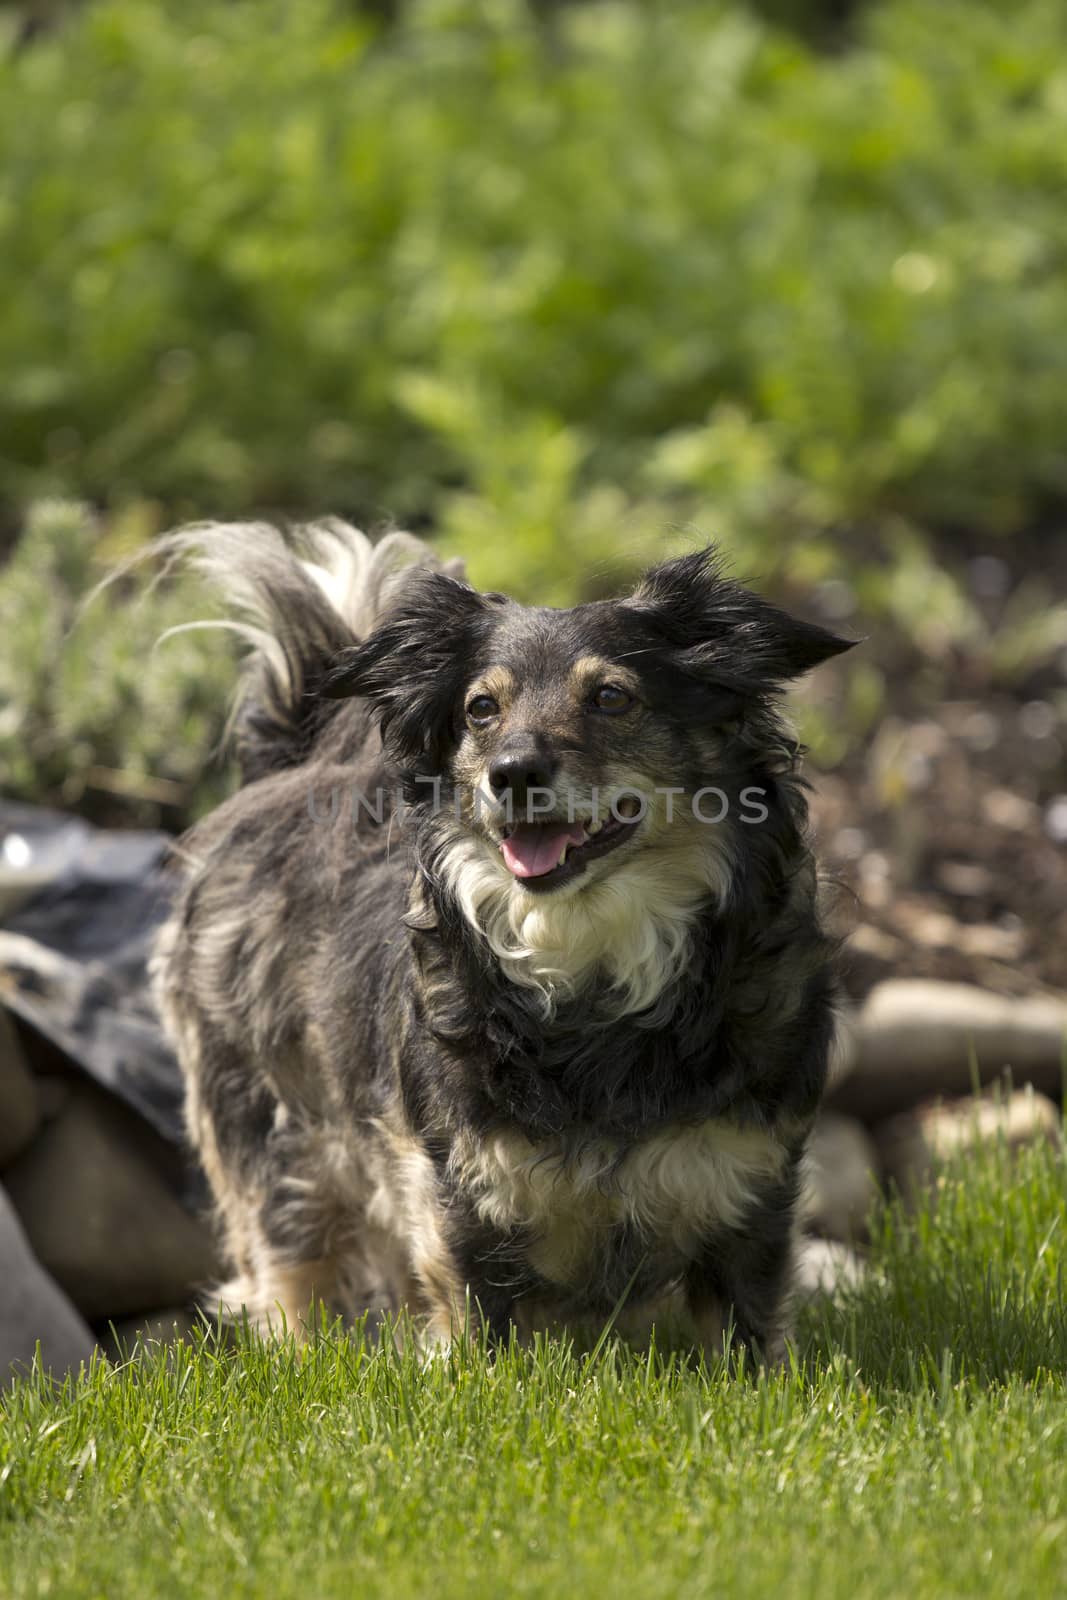 mixed breed dog in a park with green grass and bushes 